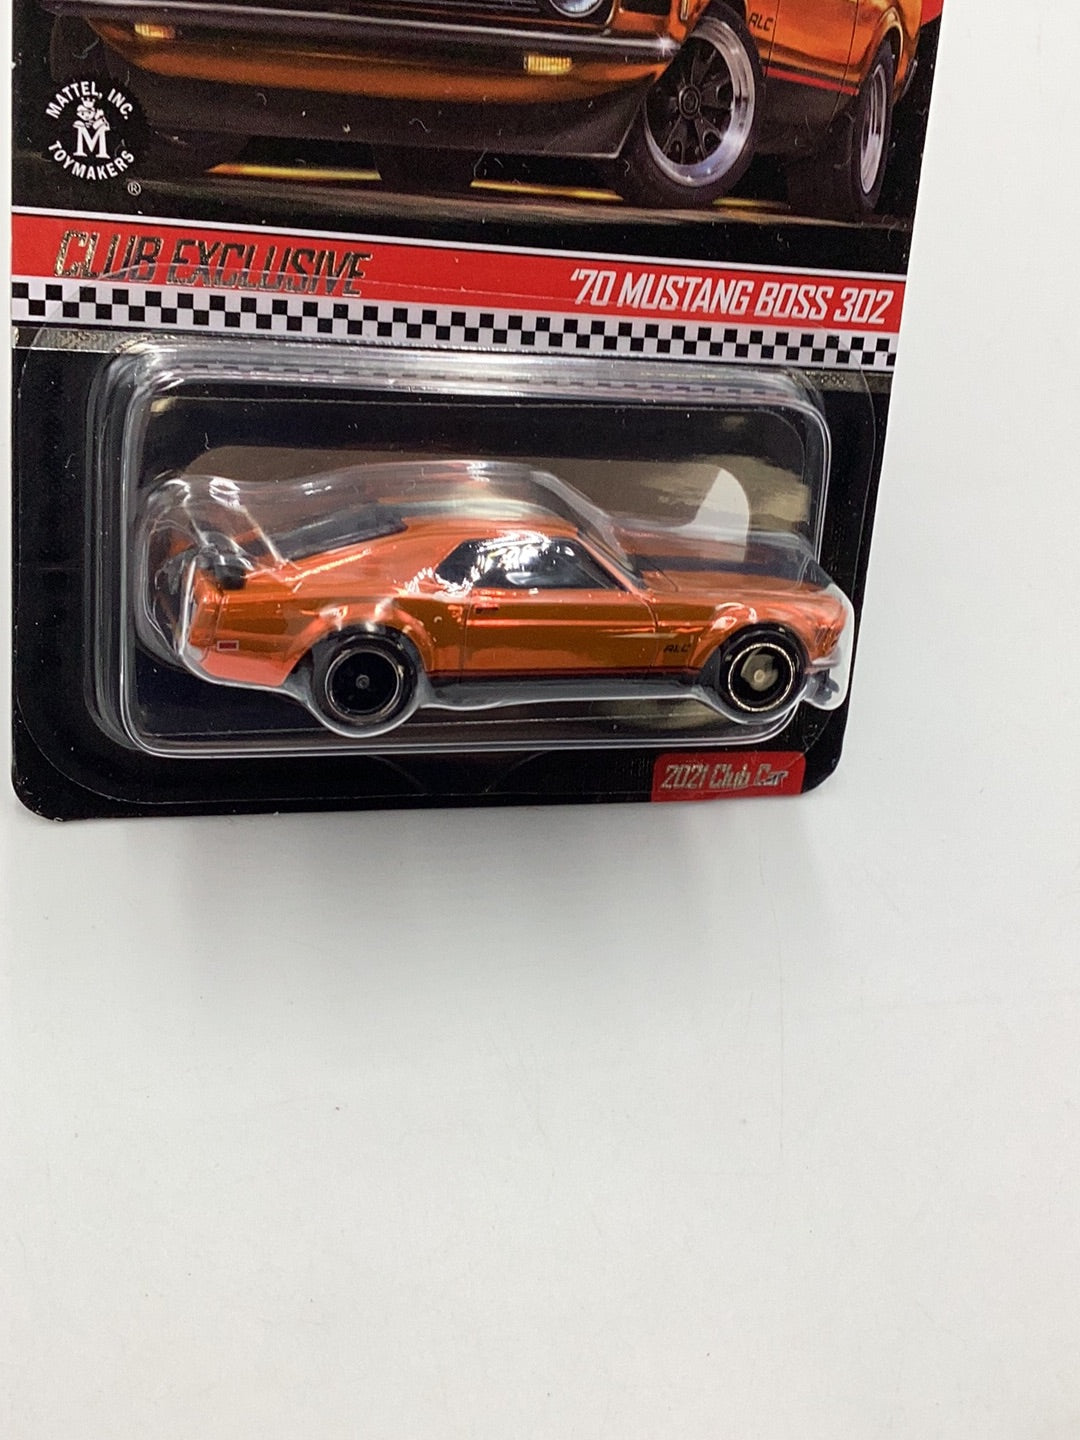 Hot Wheels redline club exclusive 70 Mustang Boss 302 2021 Club car with patch and button and protector